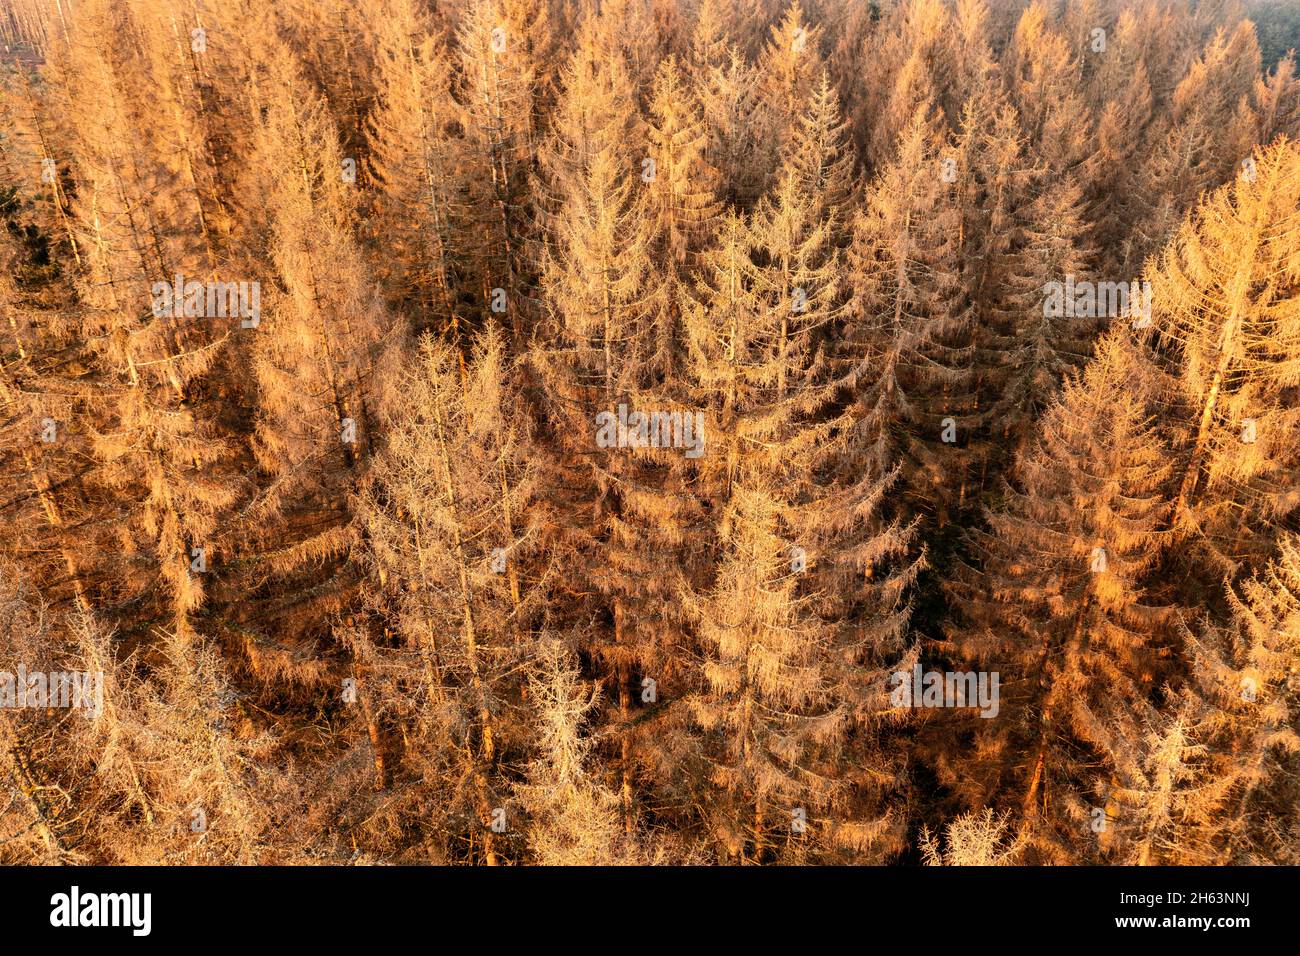 germany,thuringia,masserberg,heubach,dead trees,overview,oblique view,aerial view Stock Photo